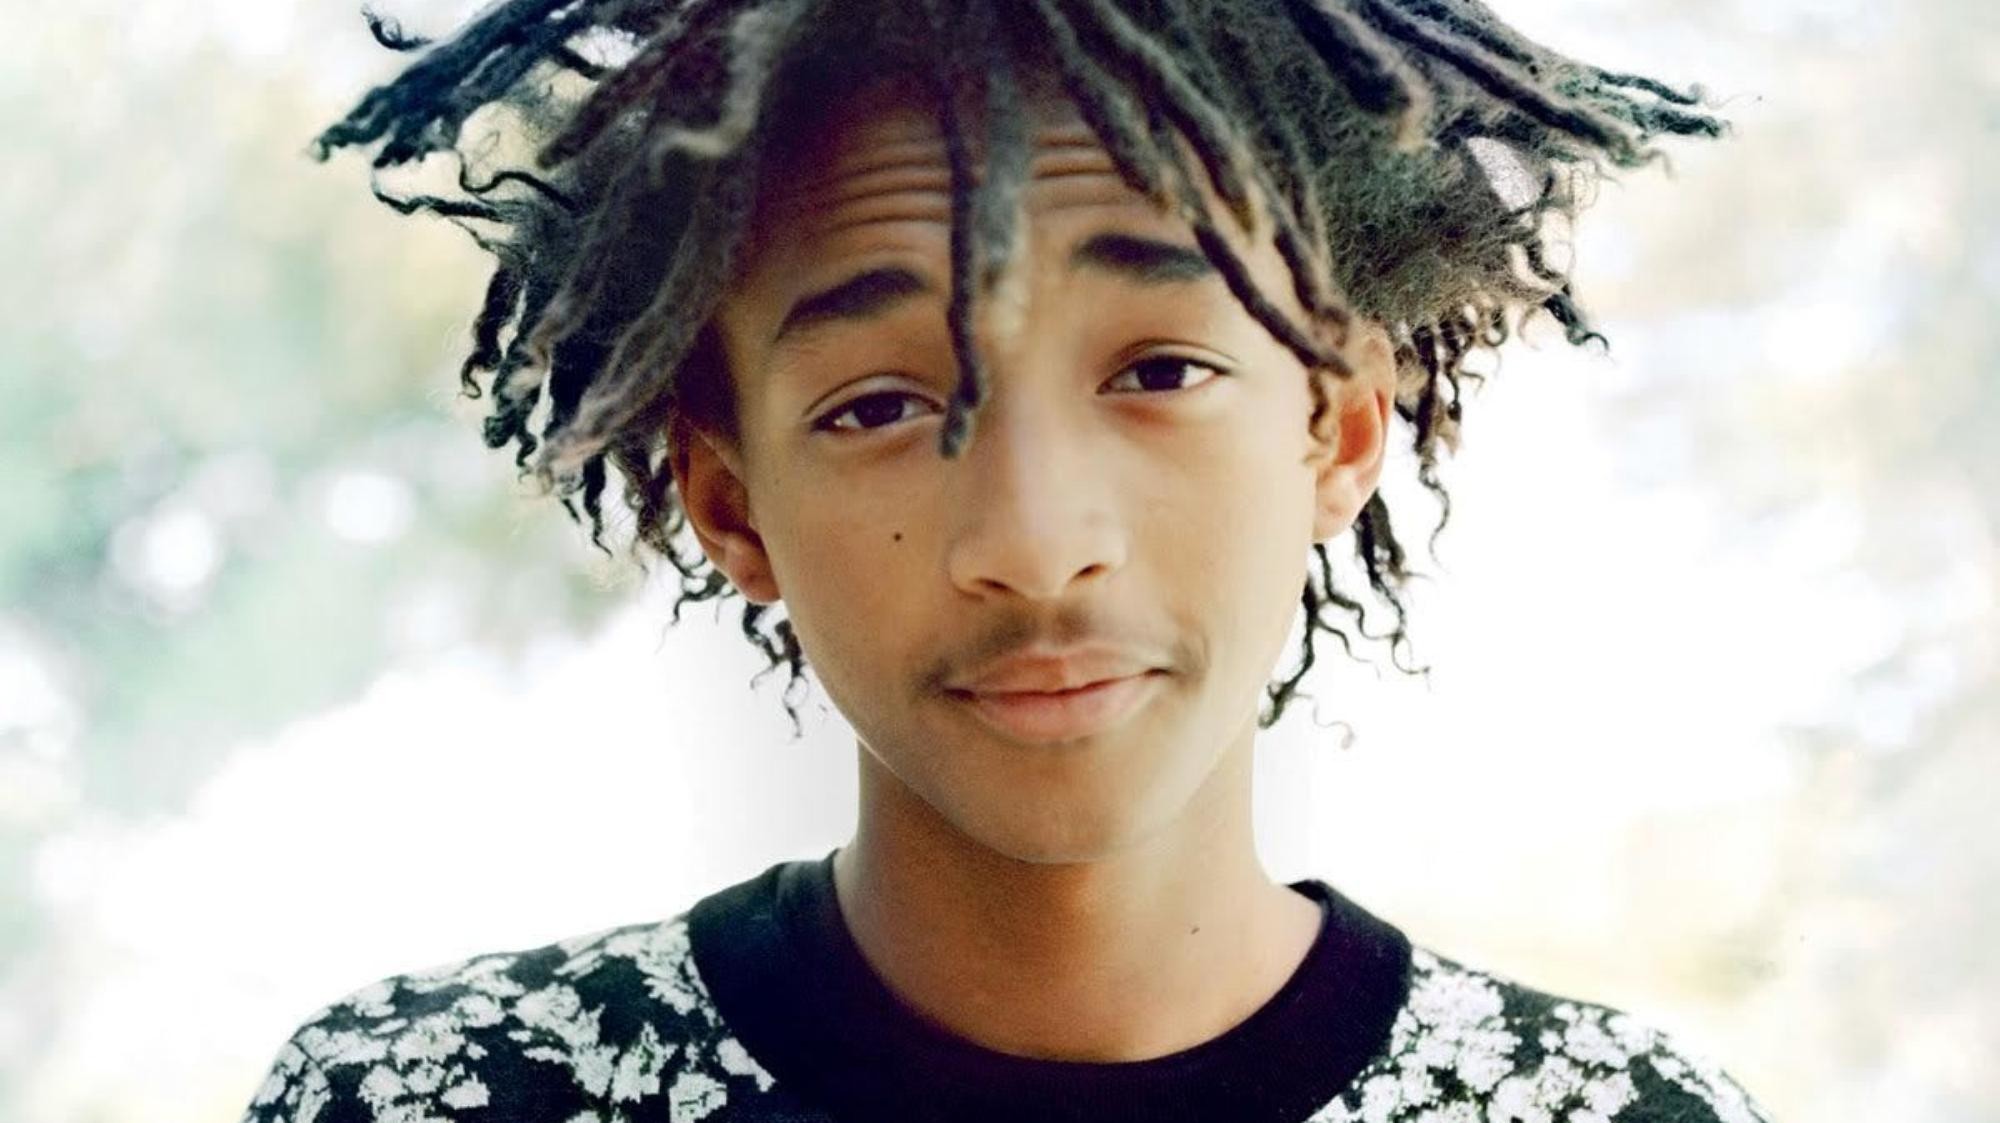 Jaden Smith Hd Wallpapers Hd Images New 1920ã1080 - Jaden Smith Images Hd - HD Wallpaper 